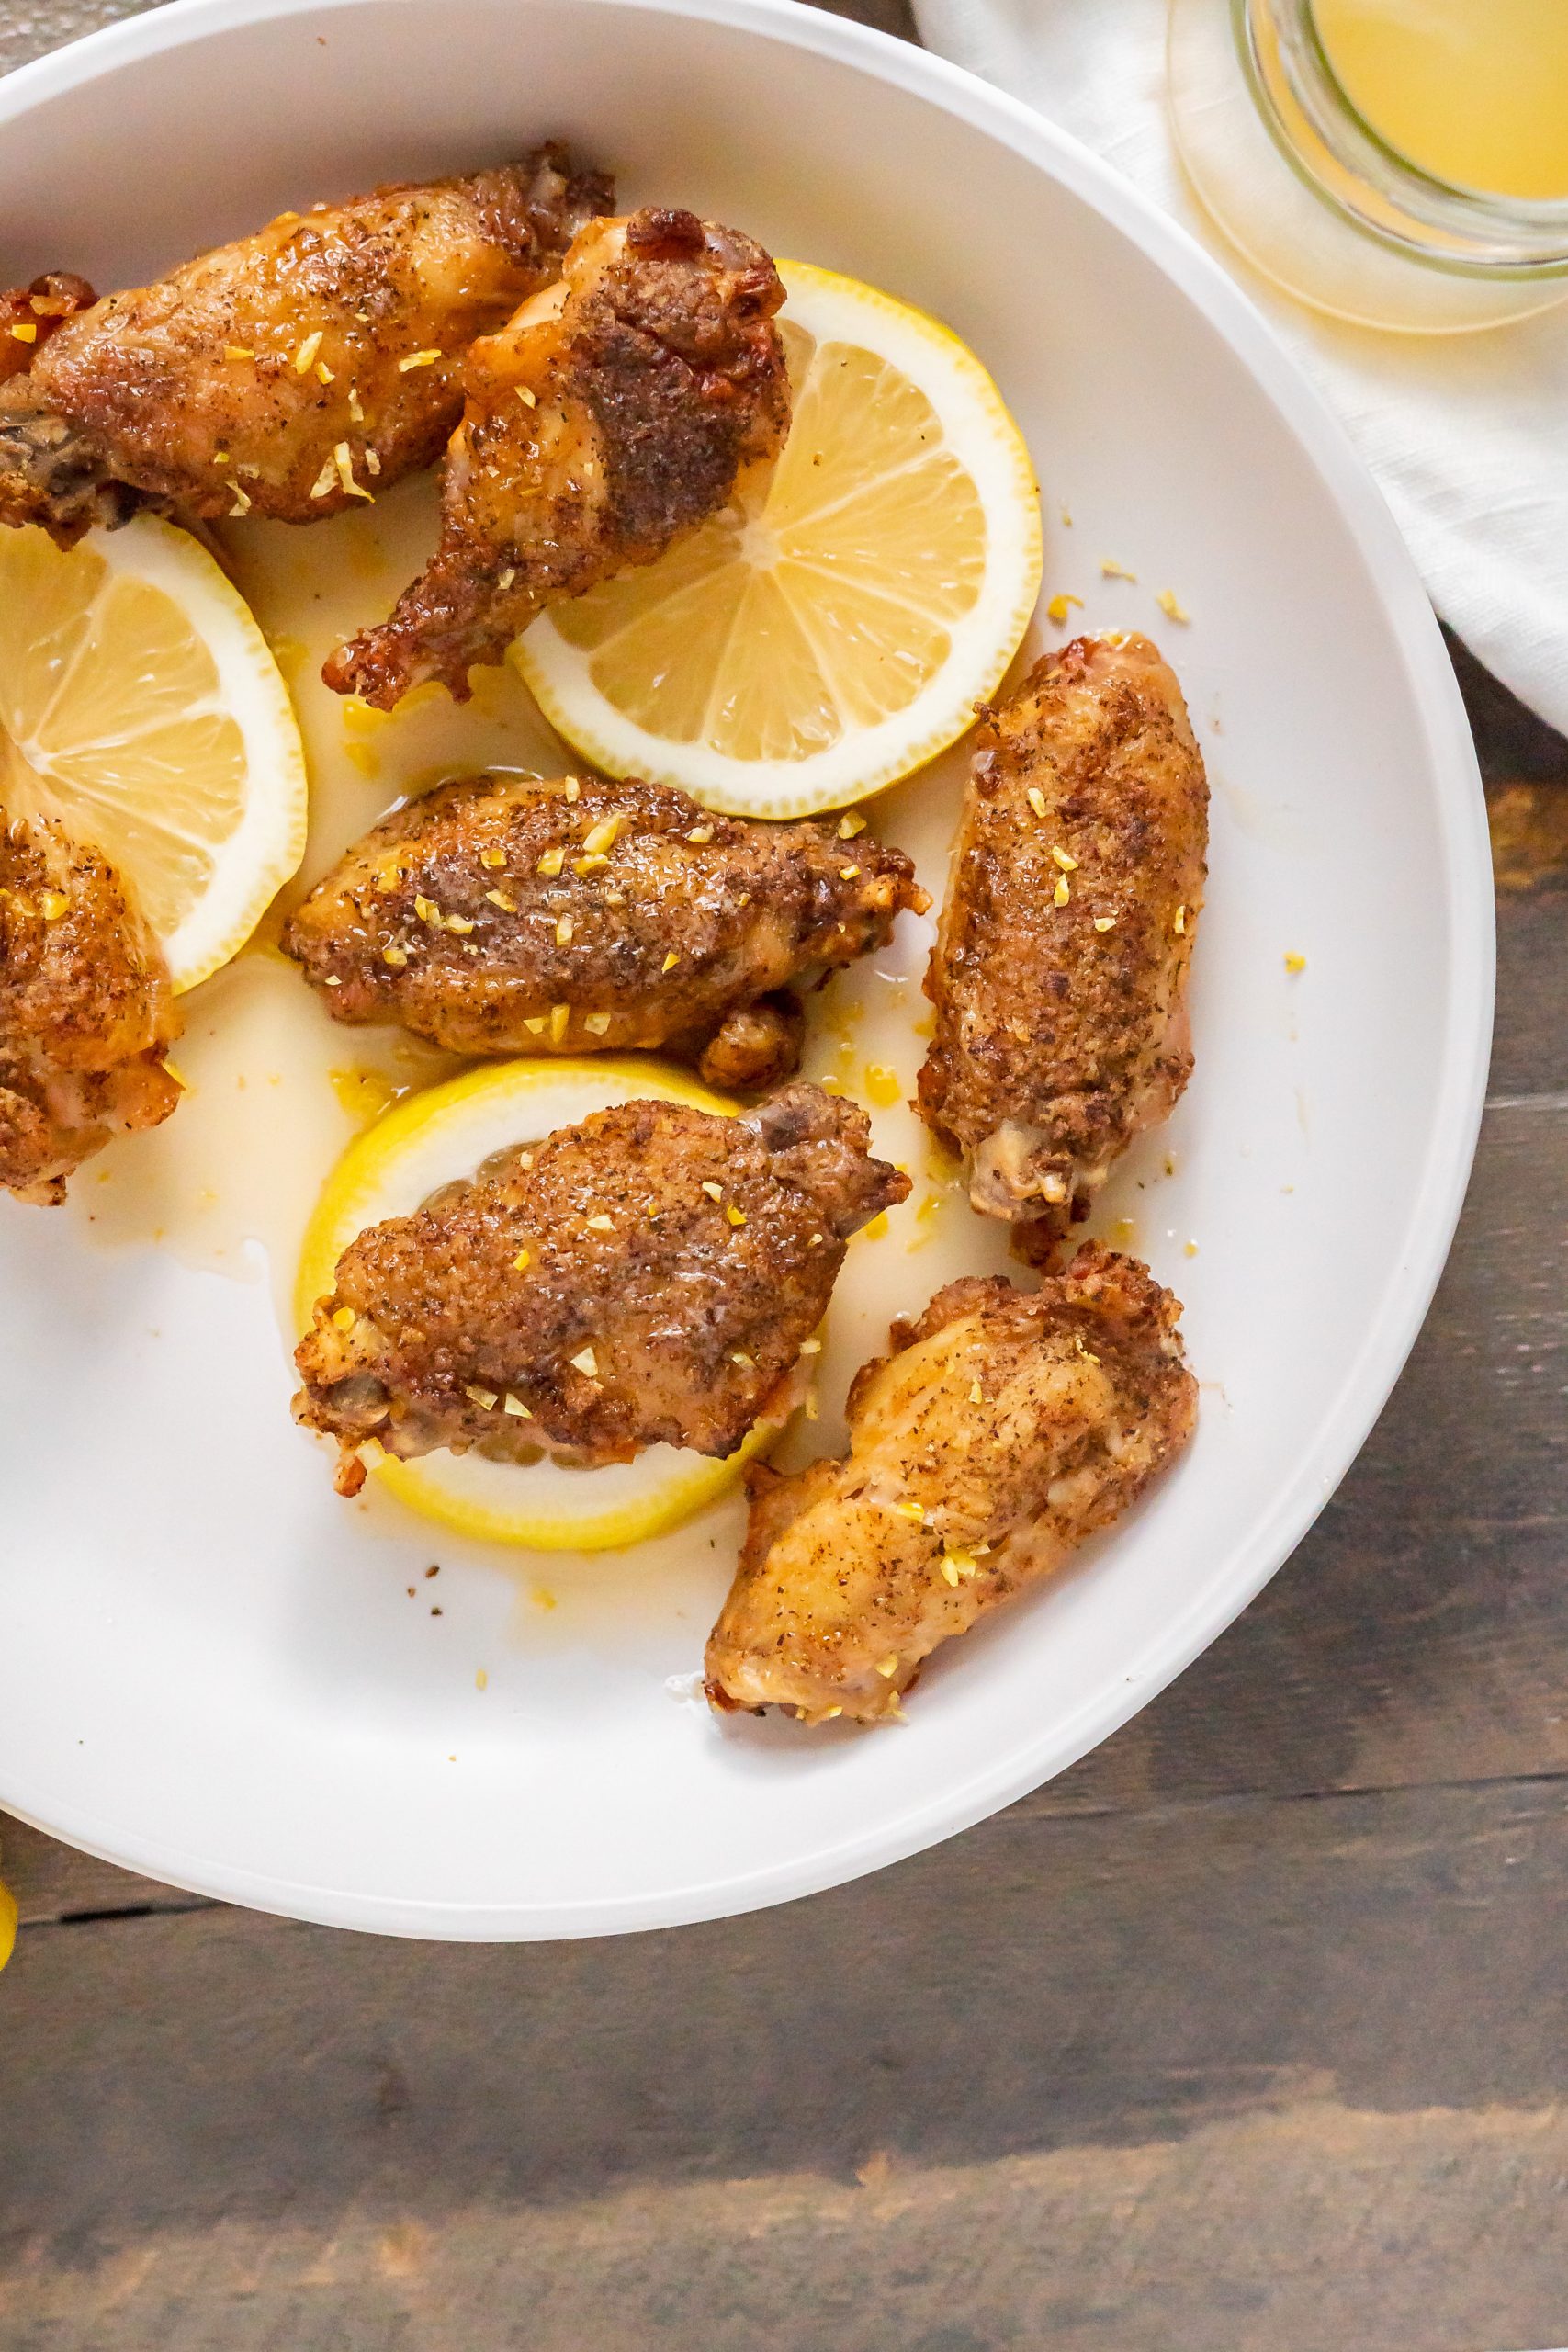 Overhead view of lemon pepper wings on a bed of lemon slices for serving.